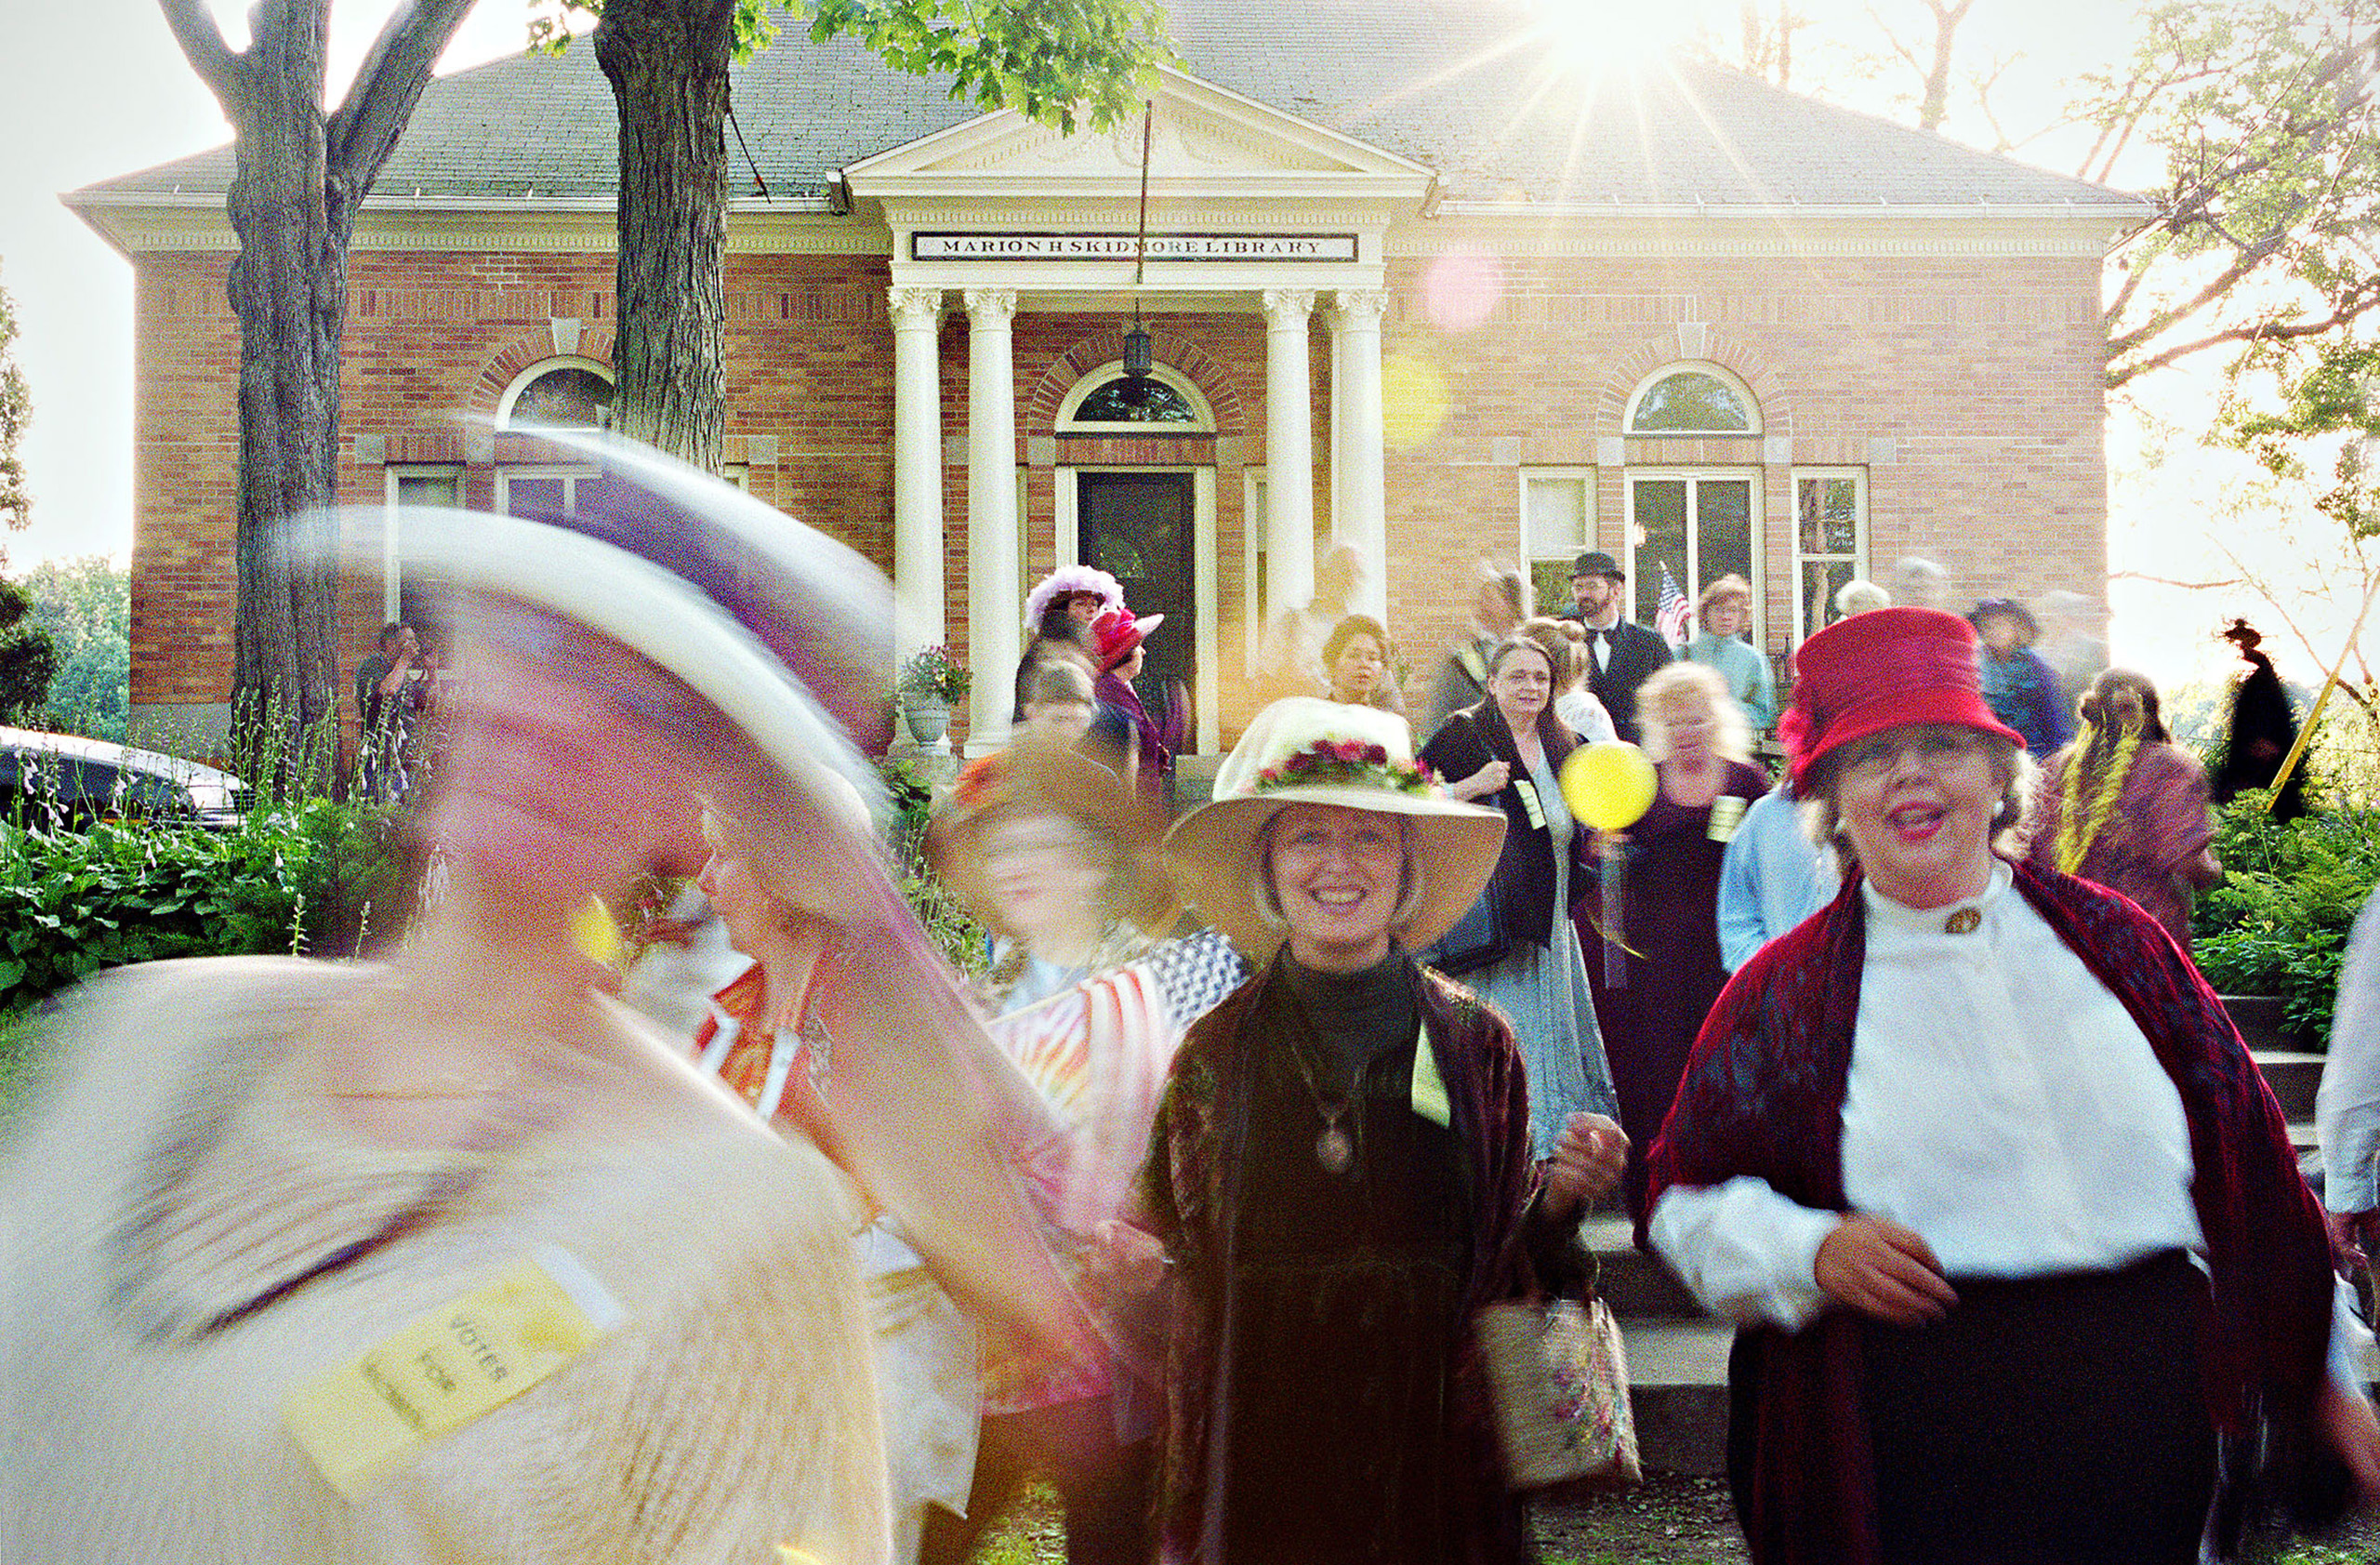 Suffragette parade, Lily Dale, New York, 2003.